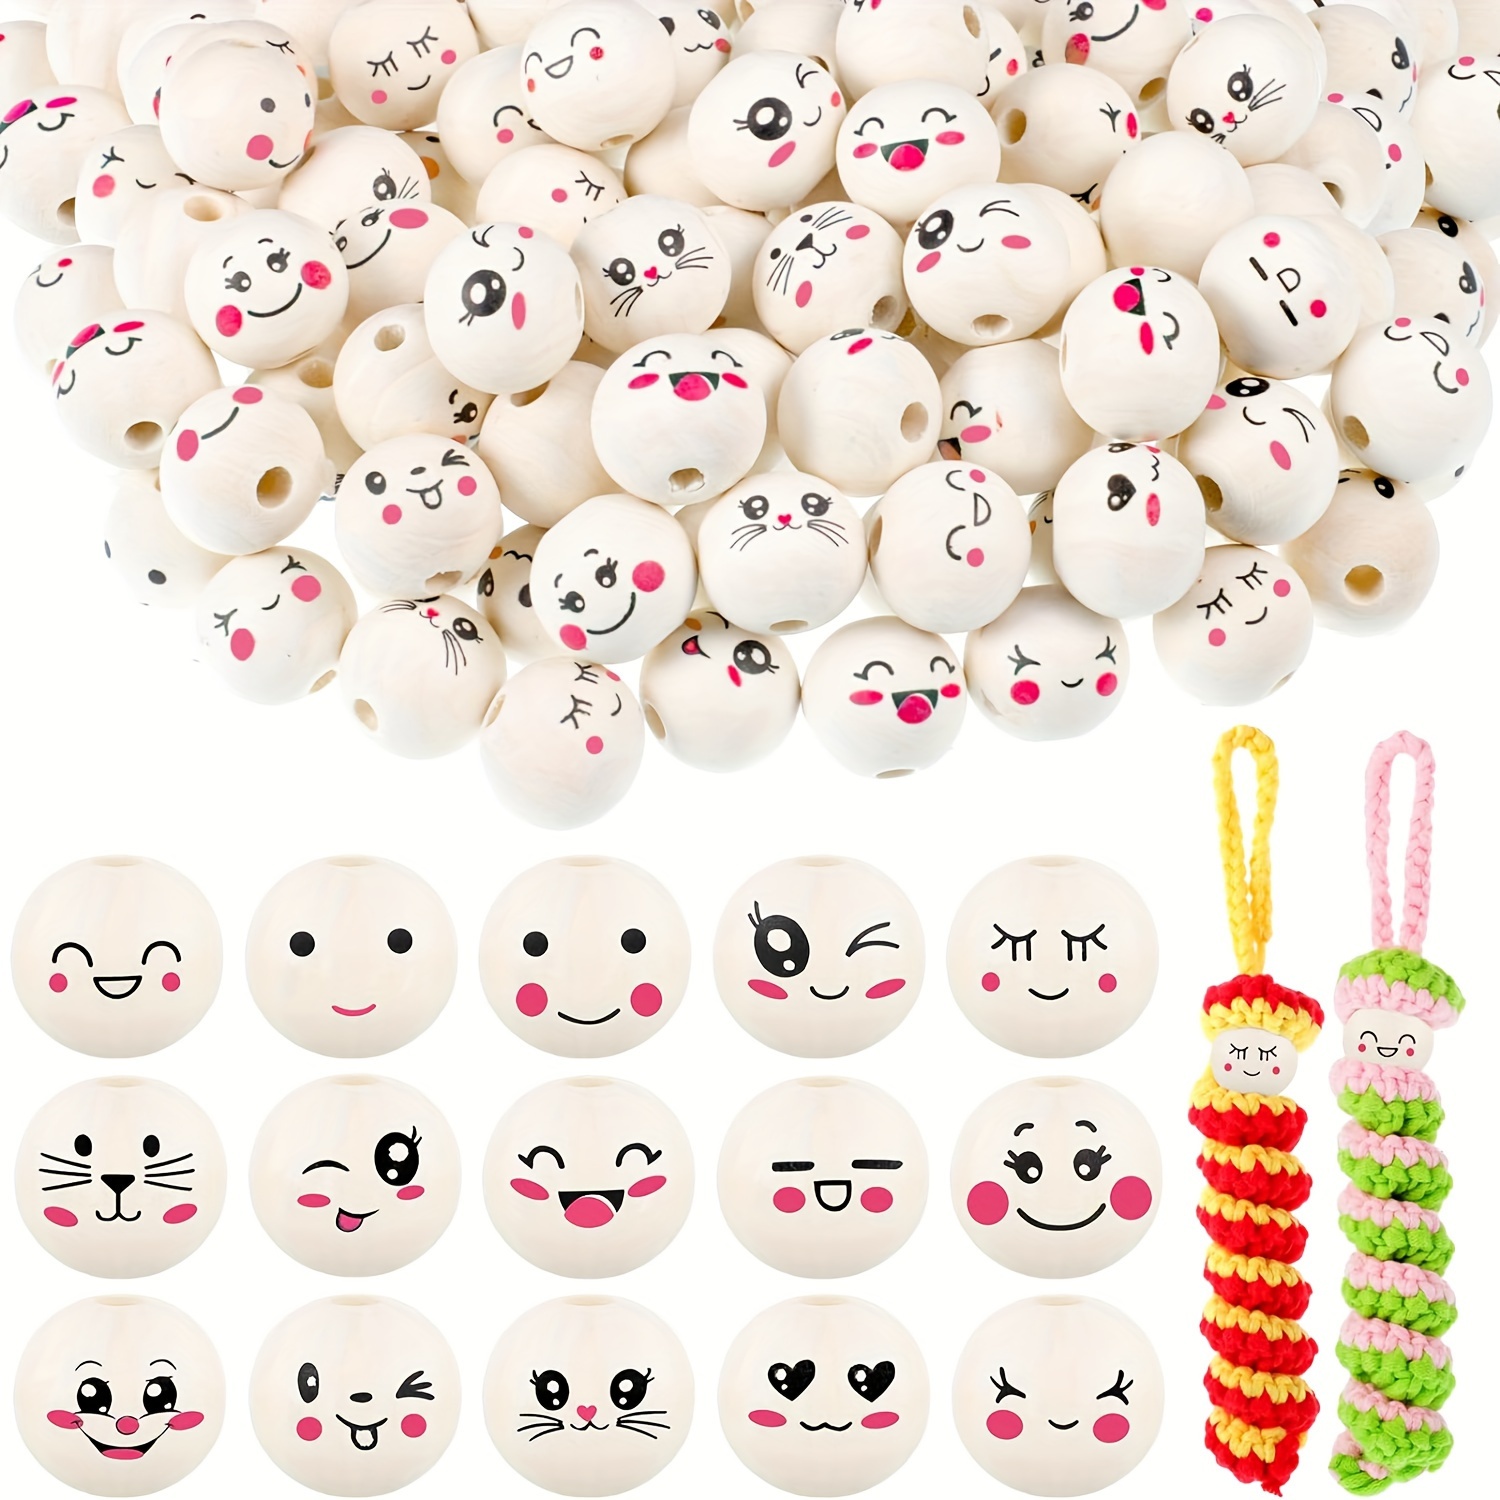 

75 Pcs Wooden Beads With Face: 15 Styles Wooden Balls With Hole 20mm, Smiling Face Wooden Beads, Nature Wooden Heads For Worry Worms, Diy Jewelry Making, Crafts